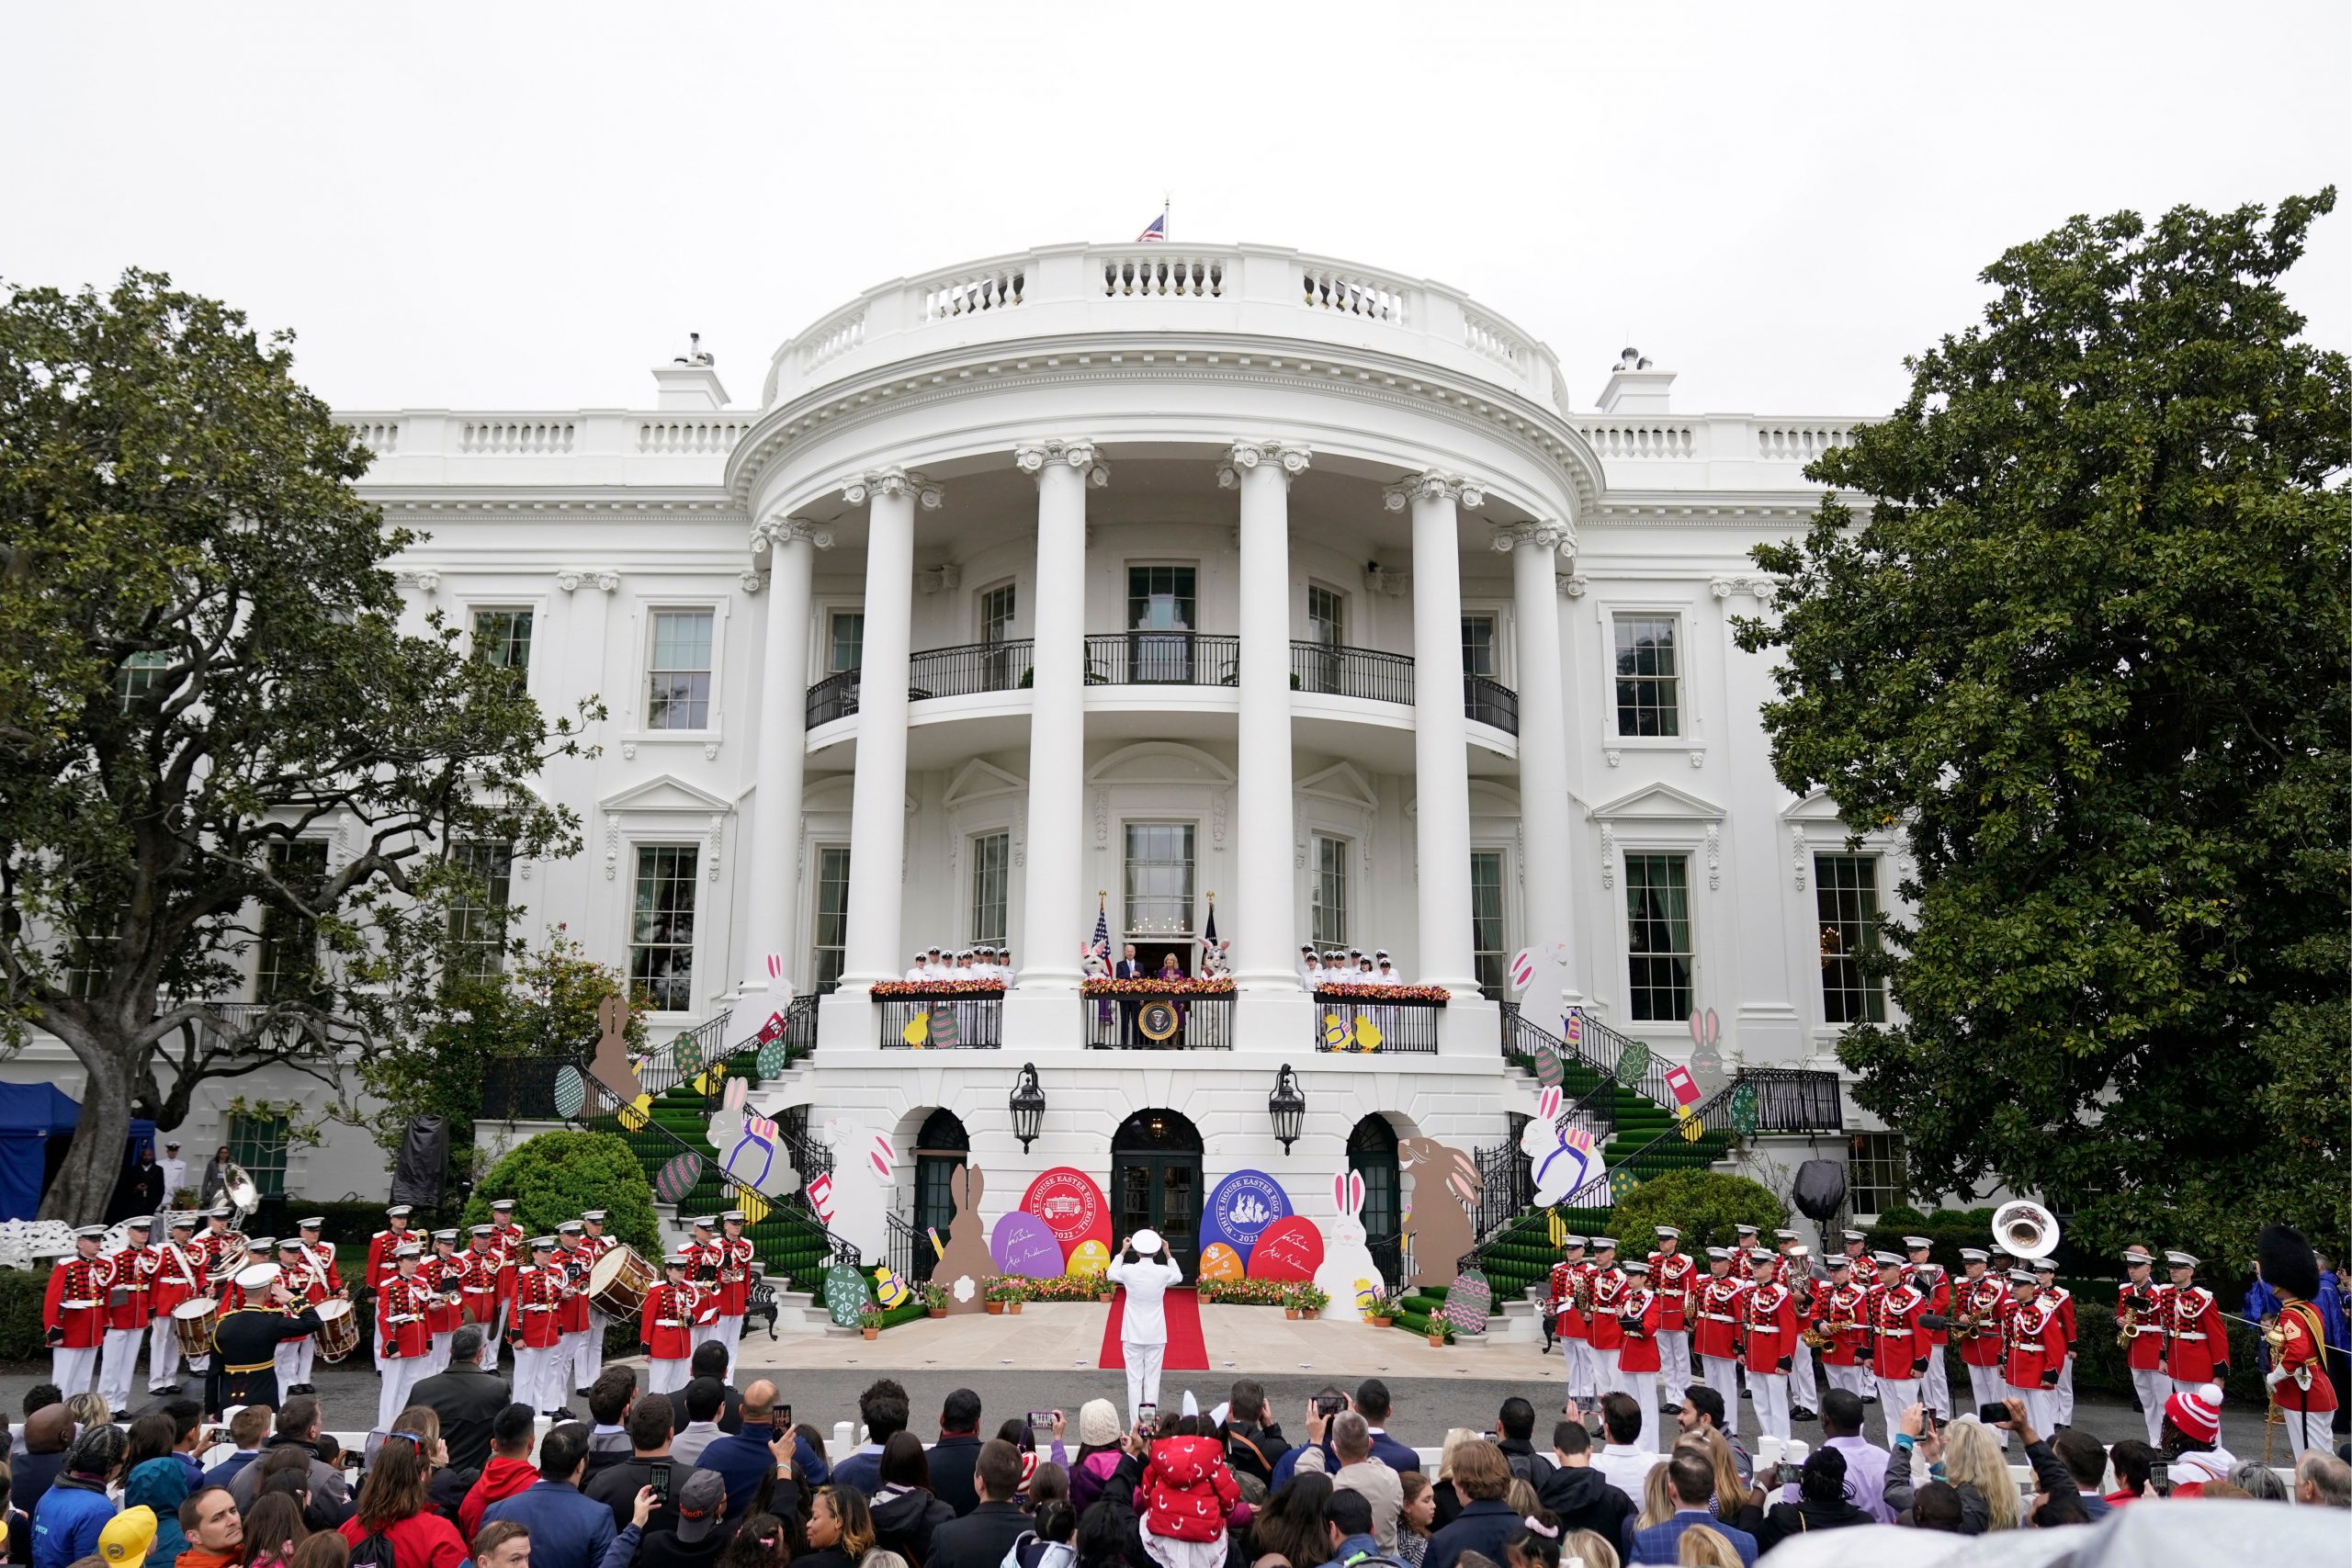 White House hosts over 30,000 people for first Easter egg roll in two years